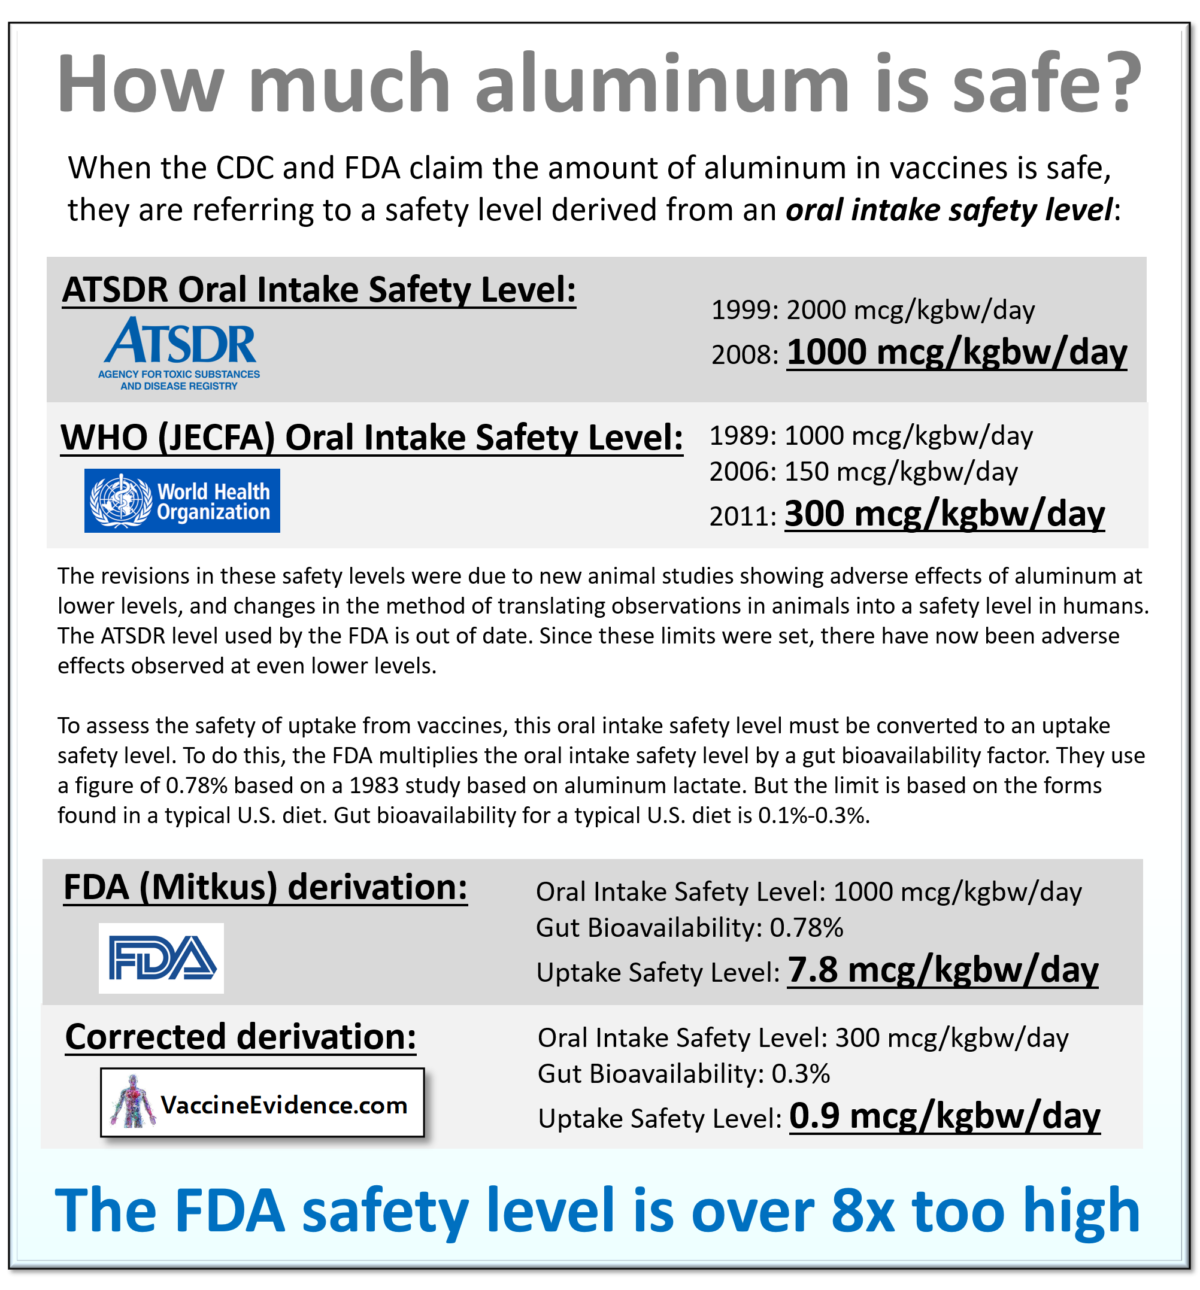 How much aluminum is safe?